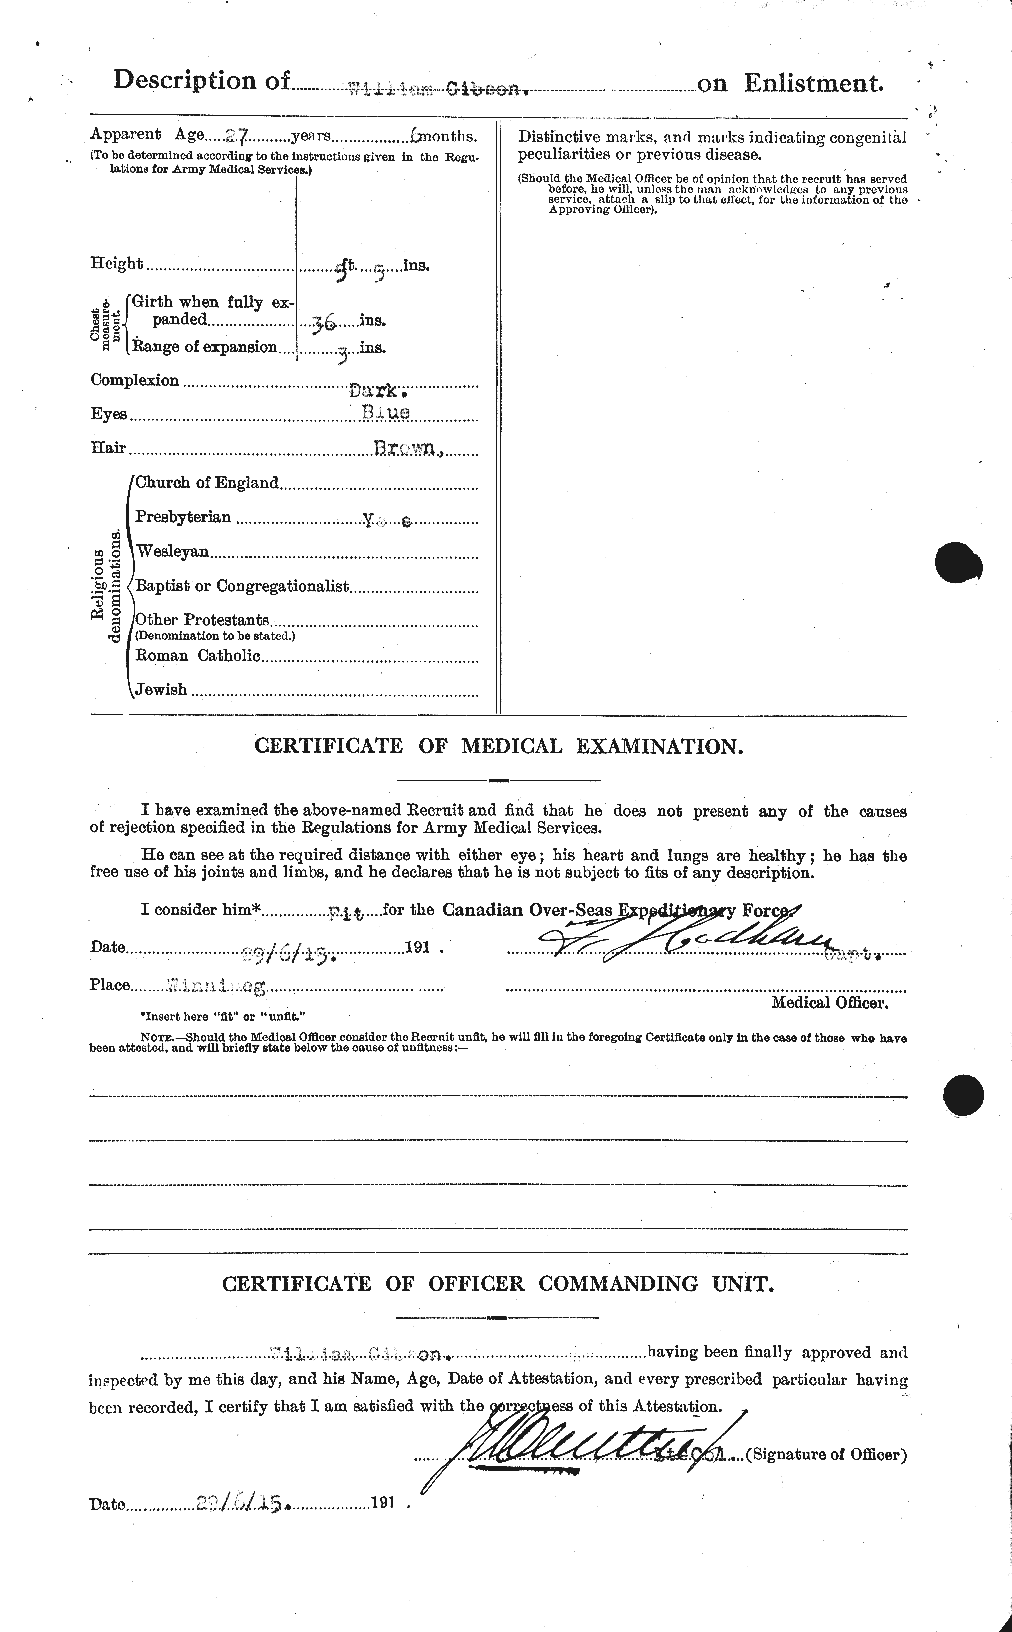 Personnel Records of the First World War - CEF 345900b